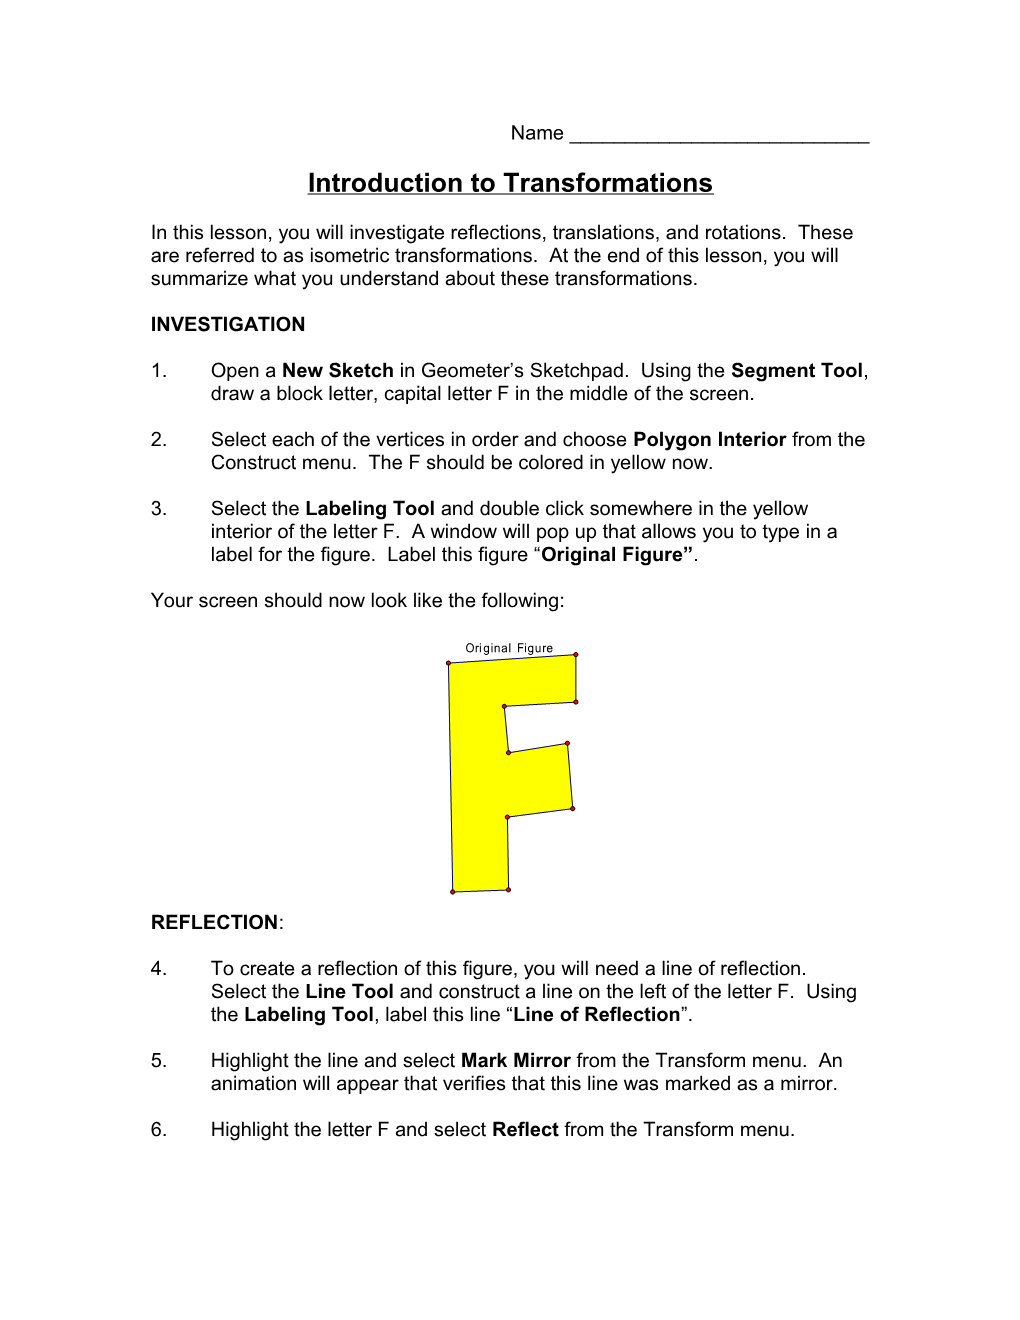 Introduction to Transformations